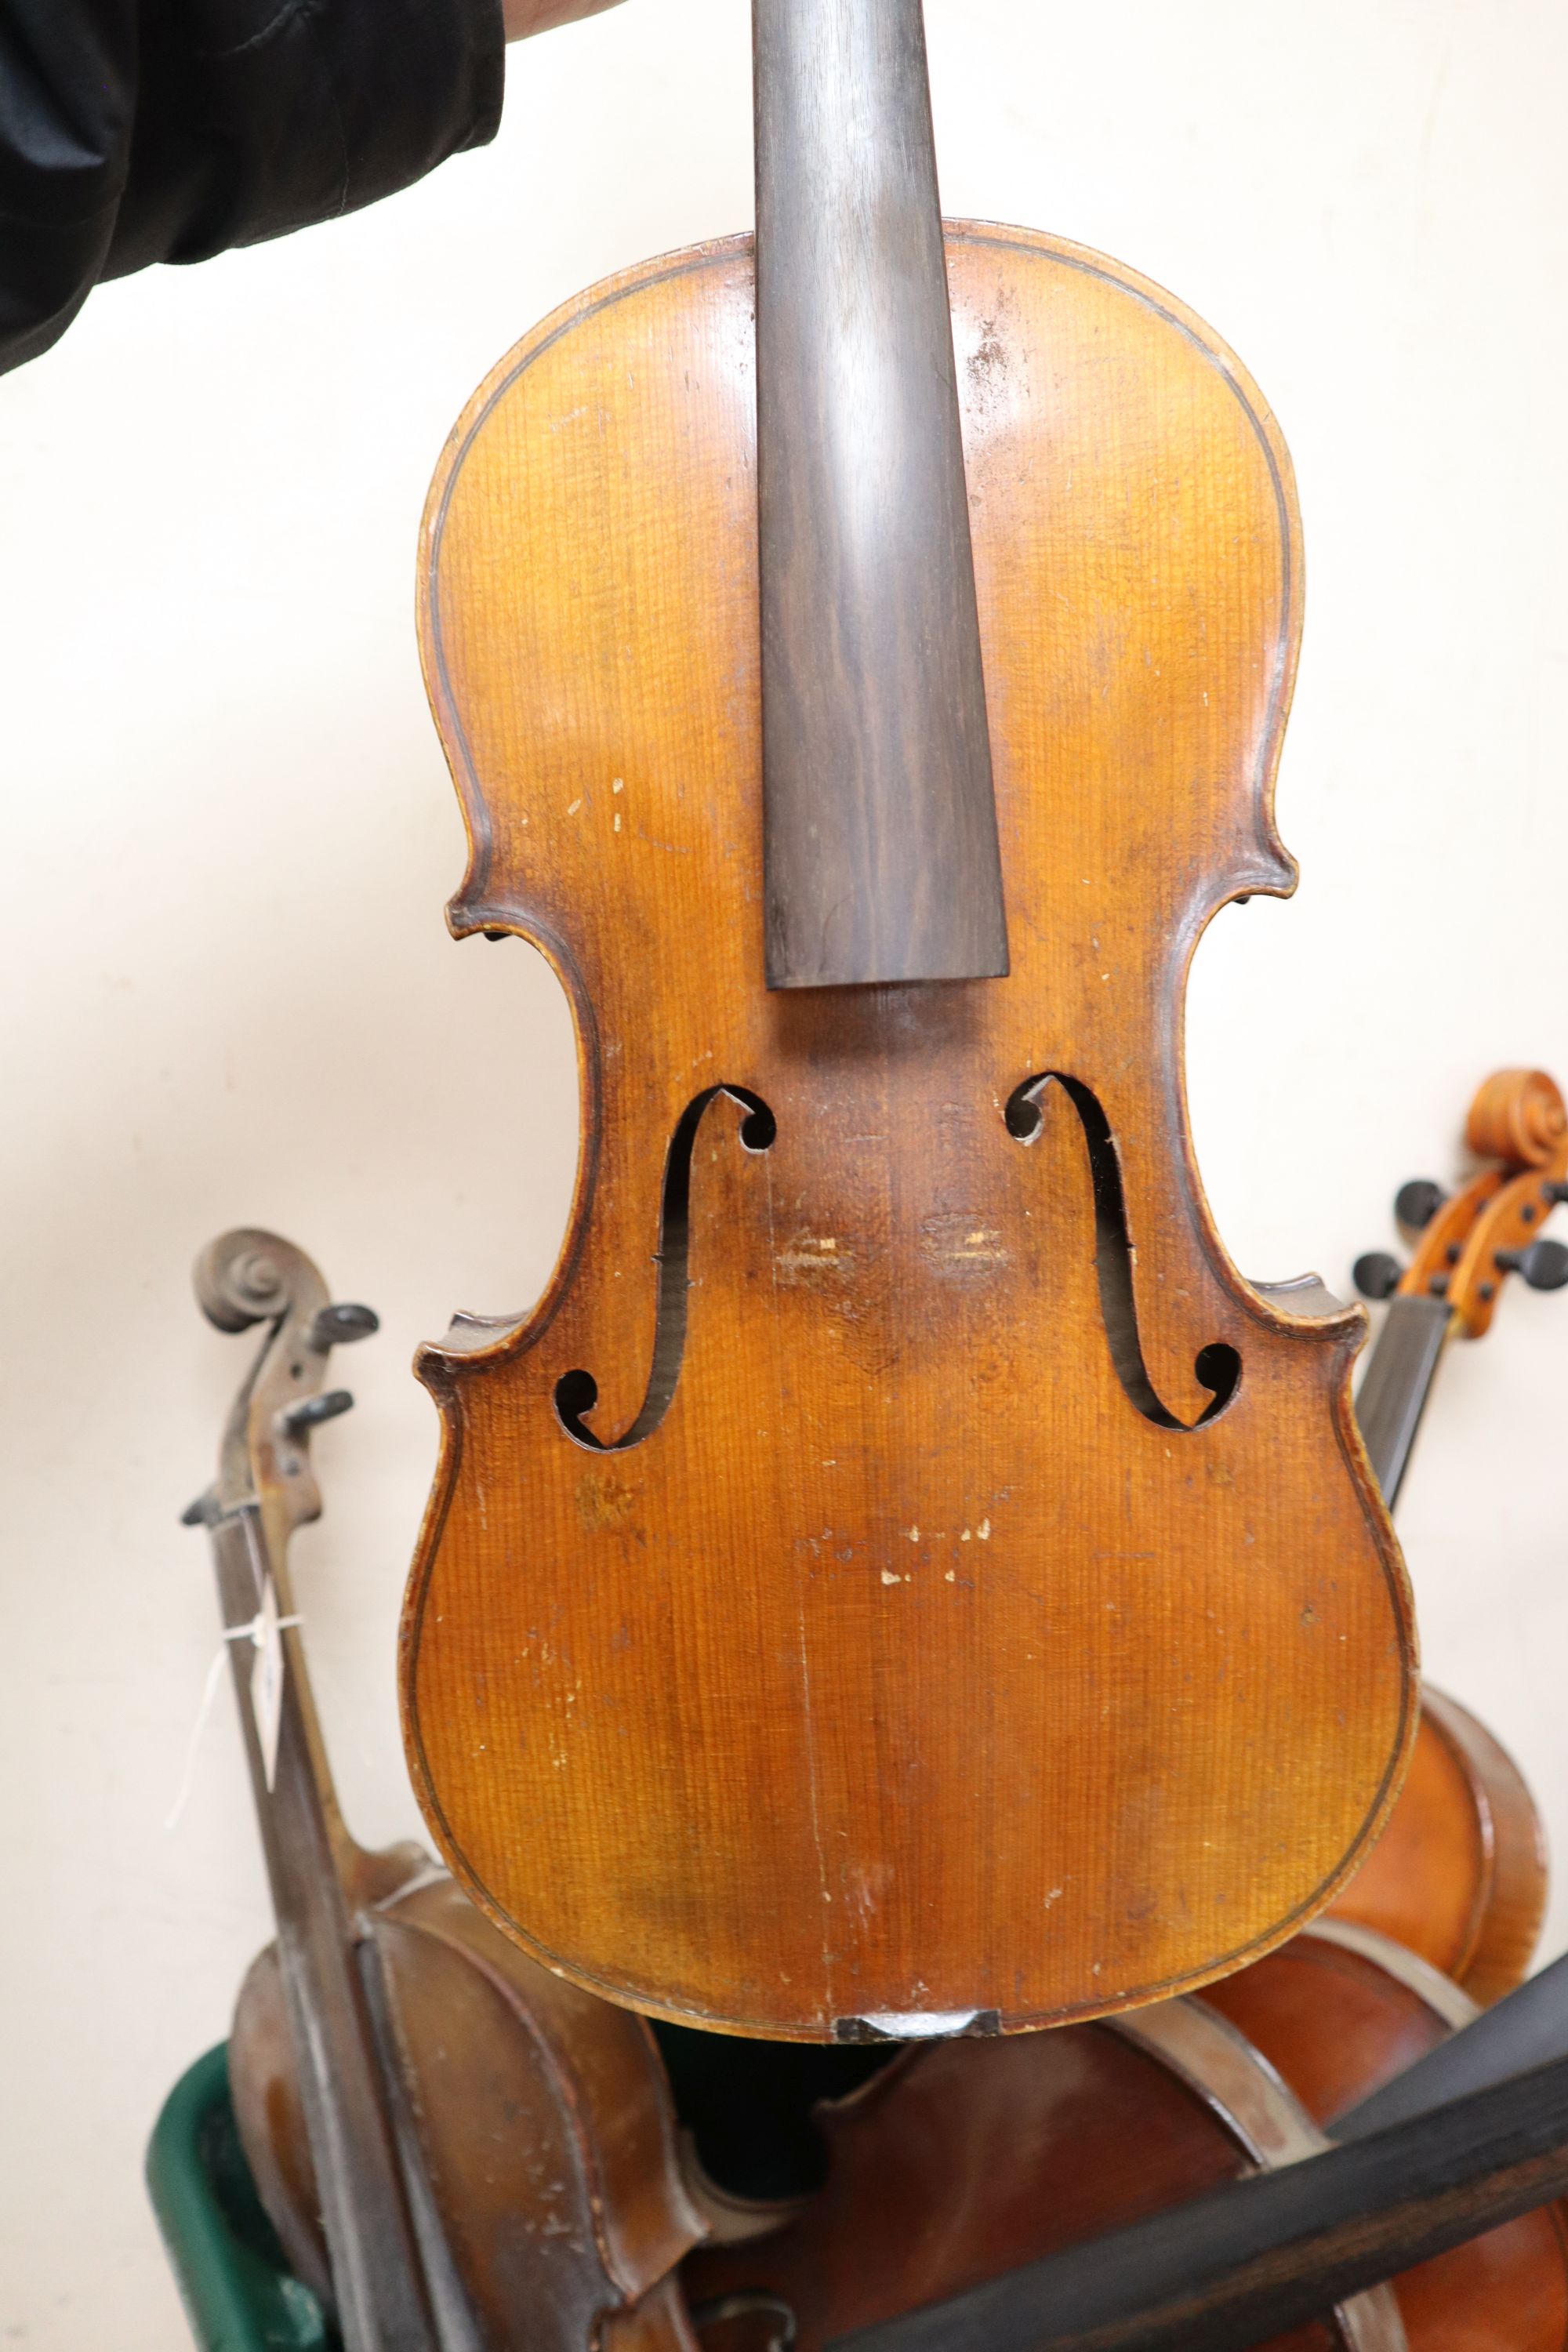 A group of five early 20th century violins